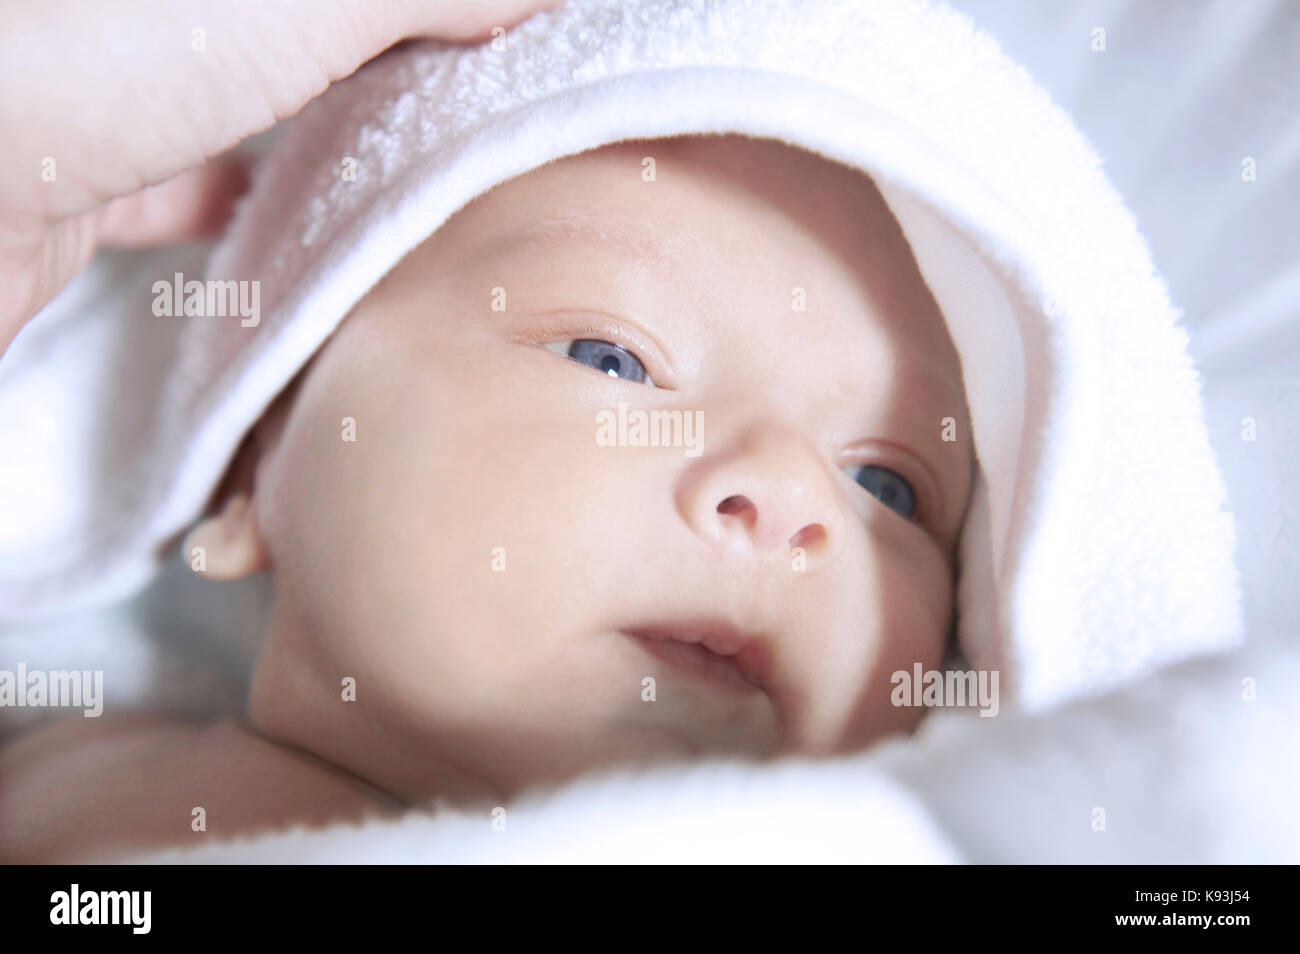 Close-up portrait of a very young newborn toddler wrapped in fresh white baby clothes. Stock Photo